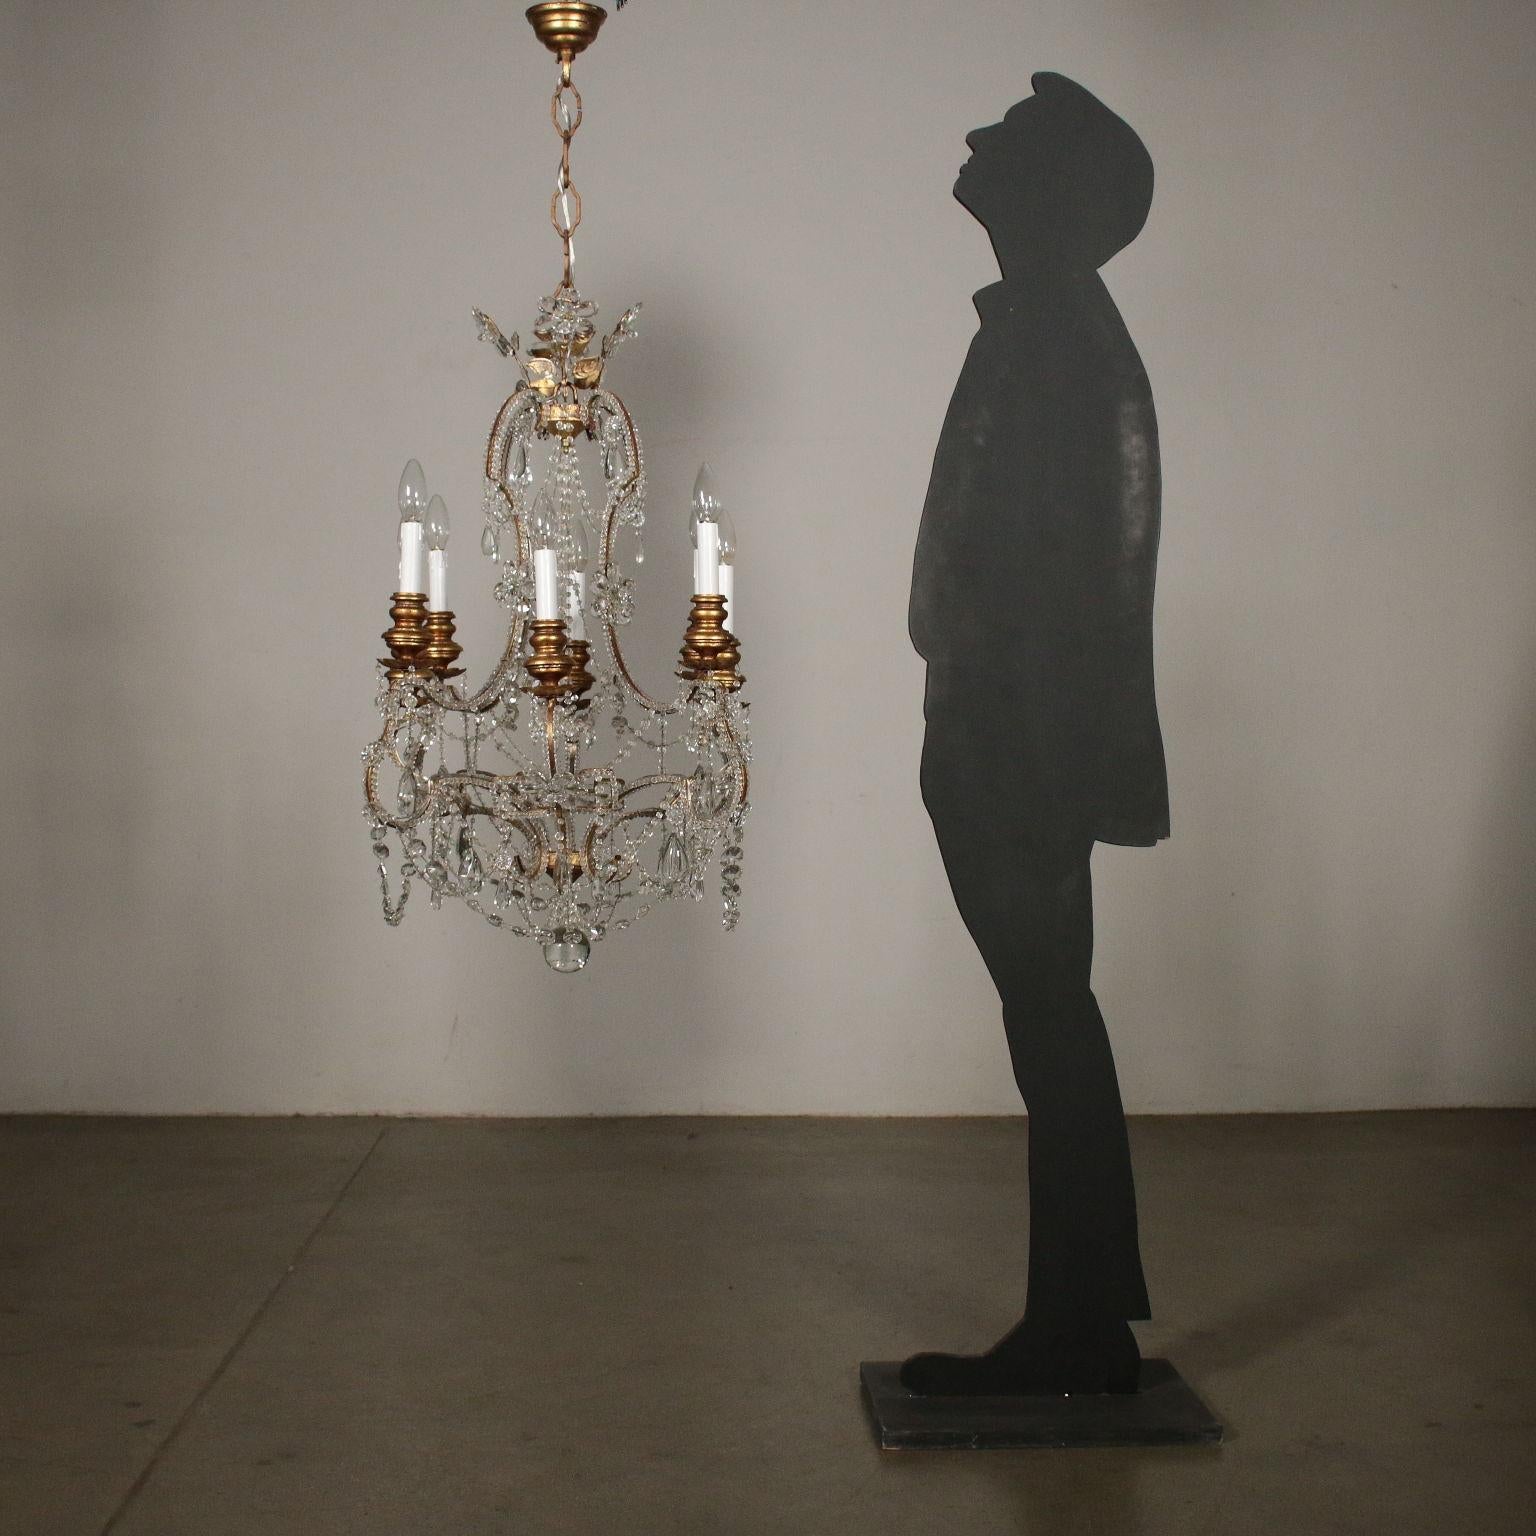 Chandelier with eight arms made of gilded iron with glass ropes and gilded wood support. Glass flowers and pendants. Manufactured in Italy, 20th century.